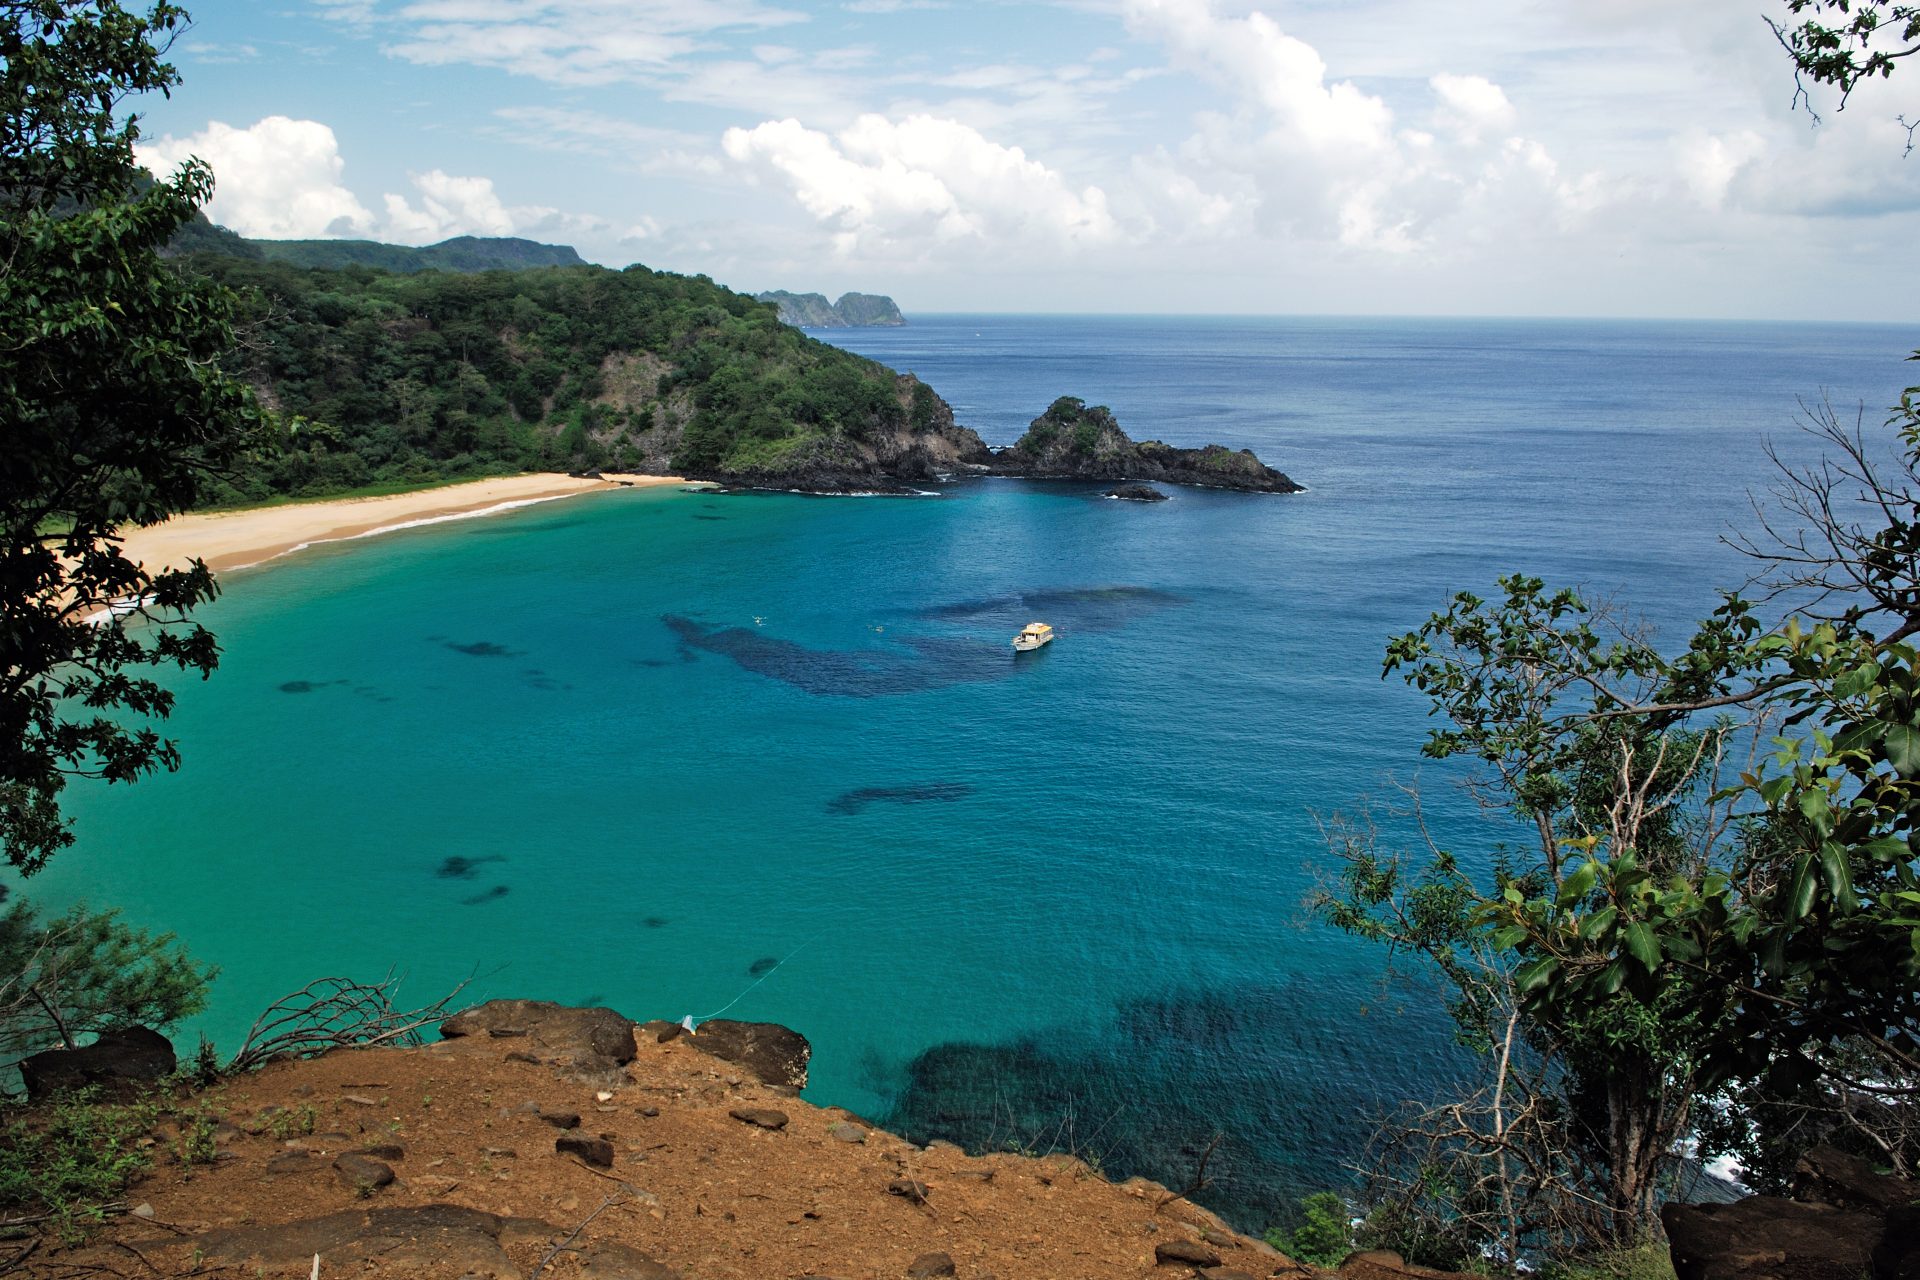 Ranking of the best beaches in the world